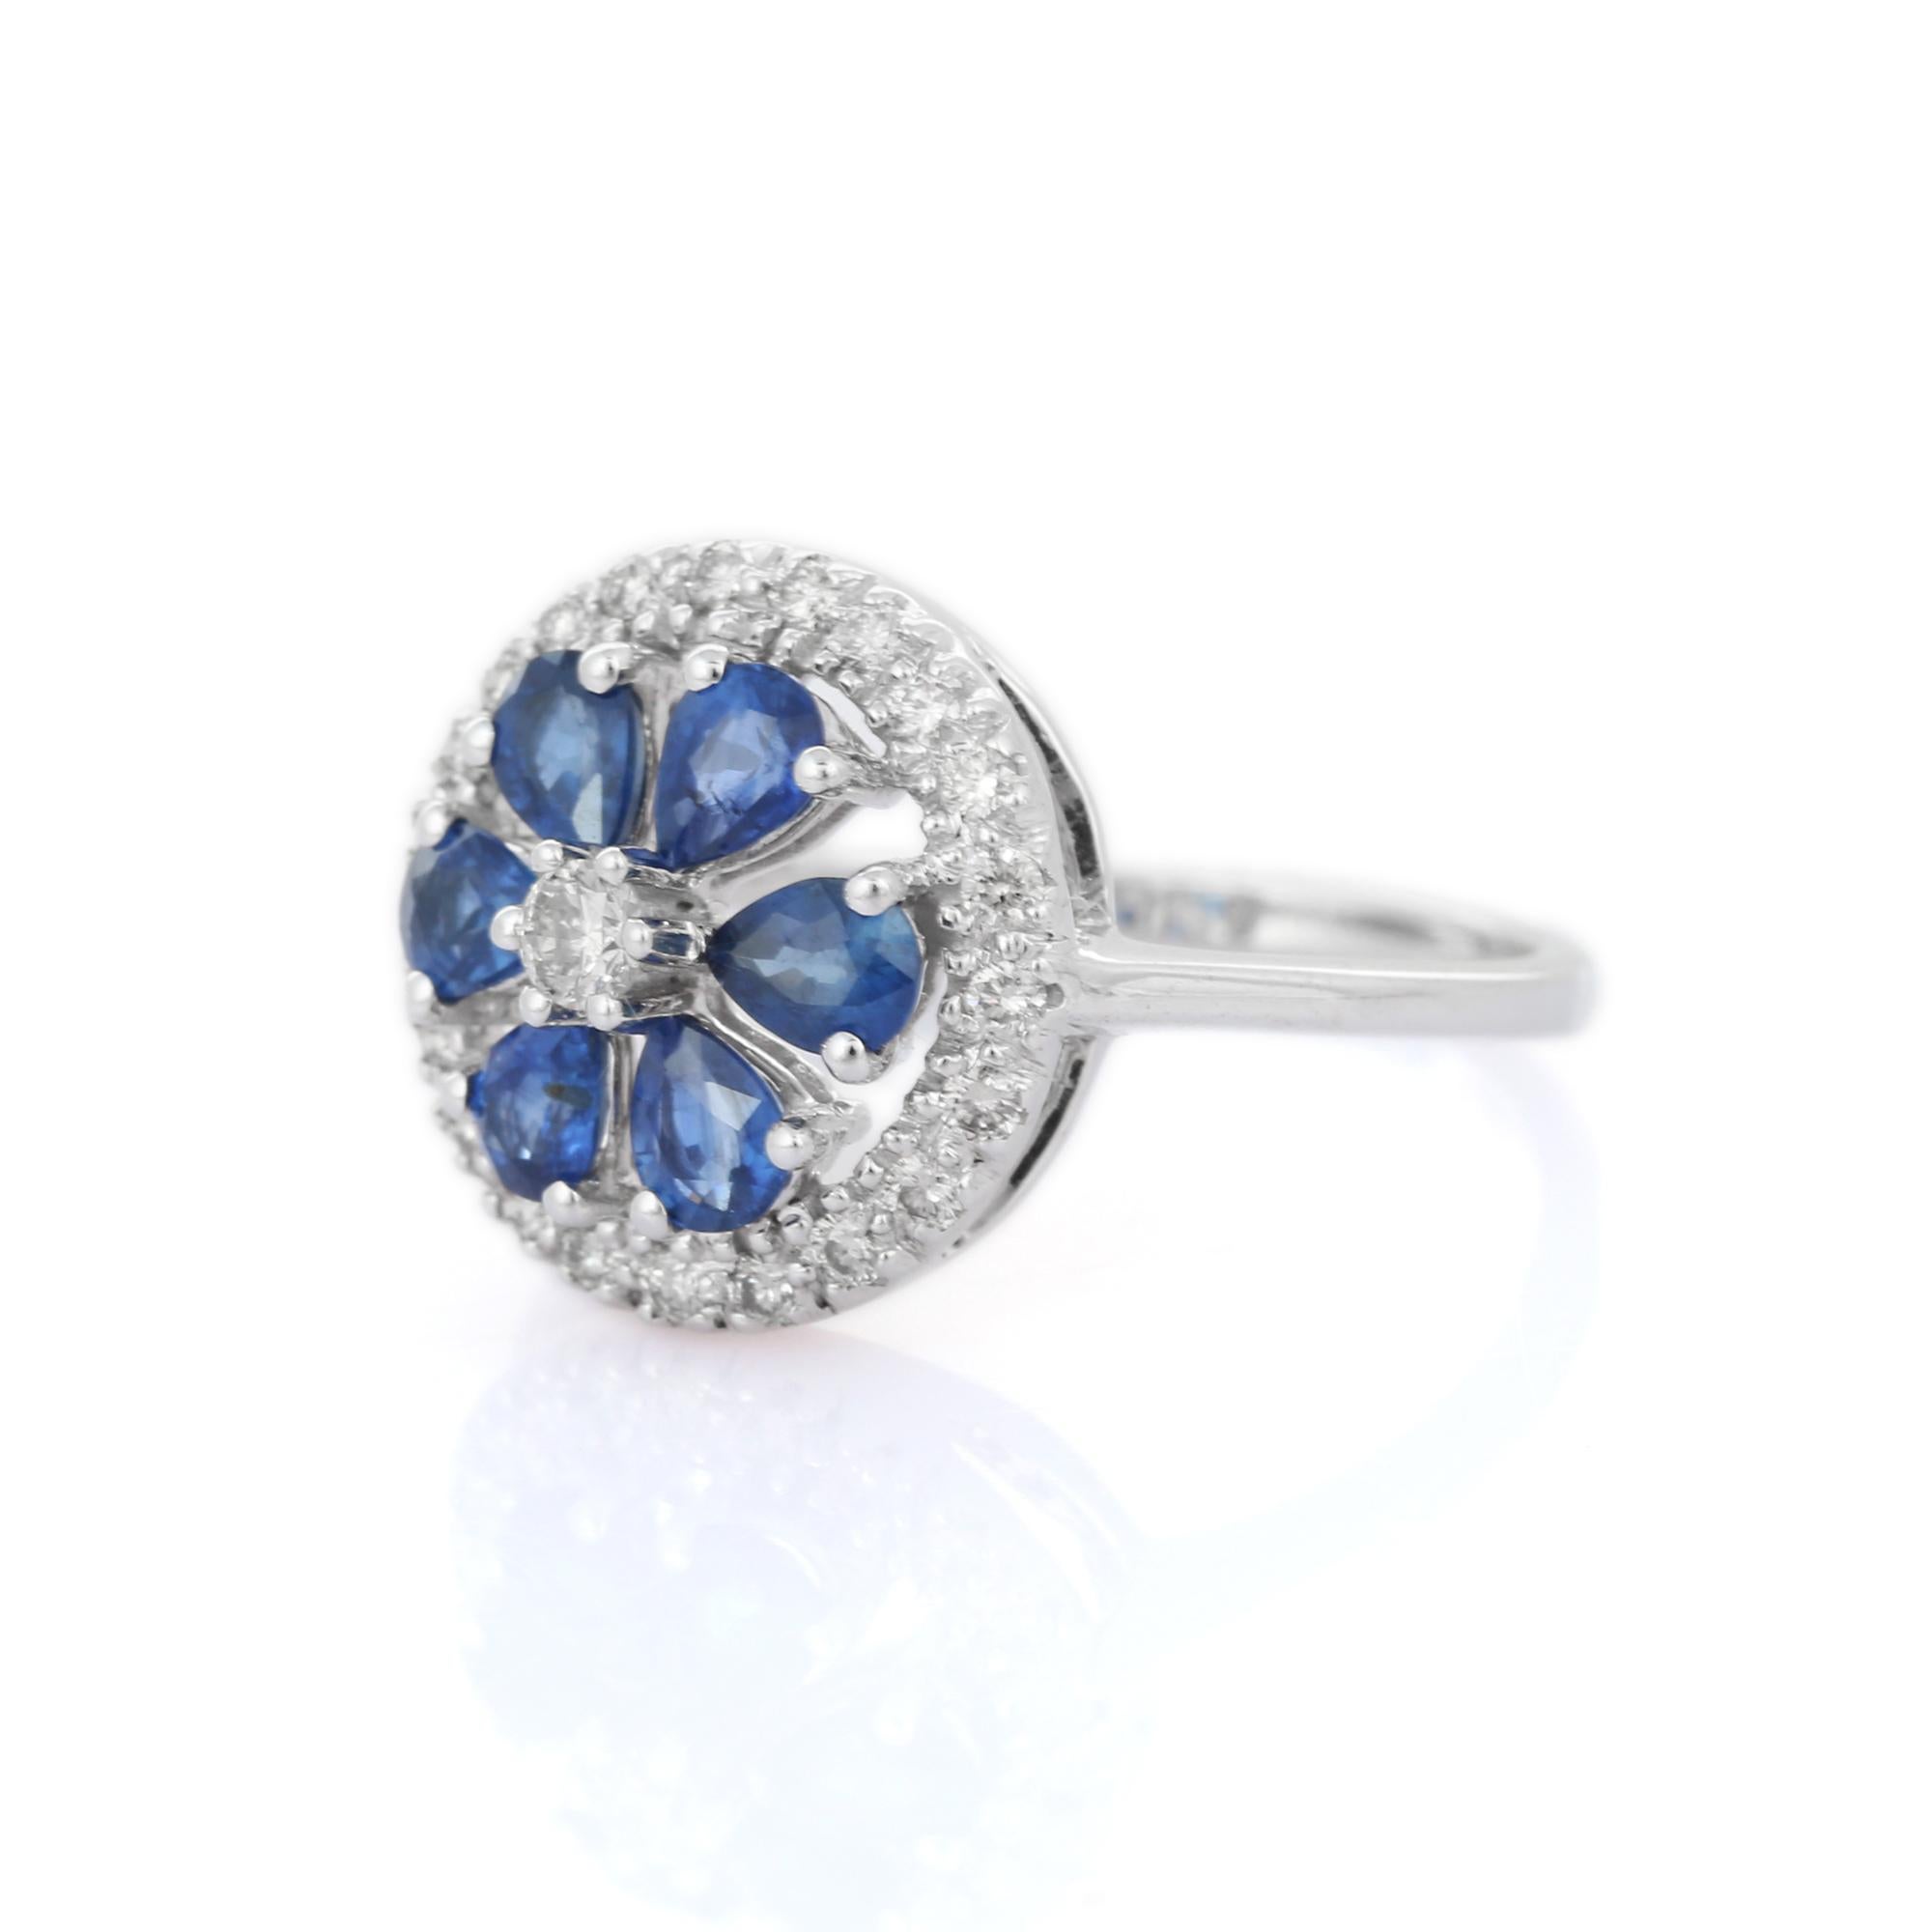 For Sale:  Estate 14k Solid White Gold Diamond and Blue Sapphire Flower Cocktail Ring 4